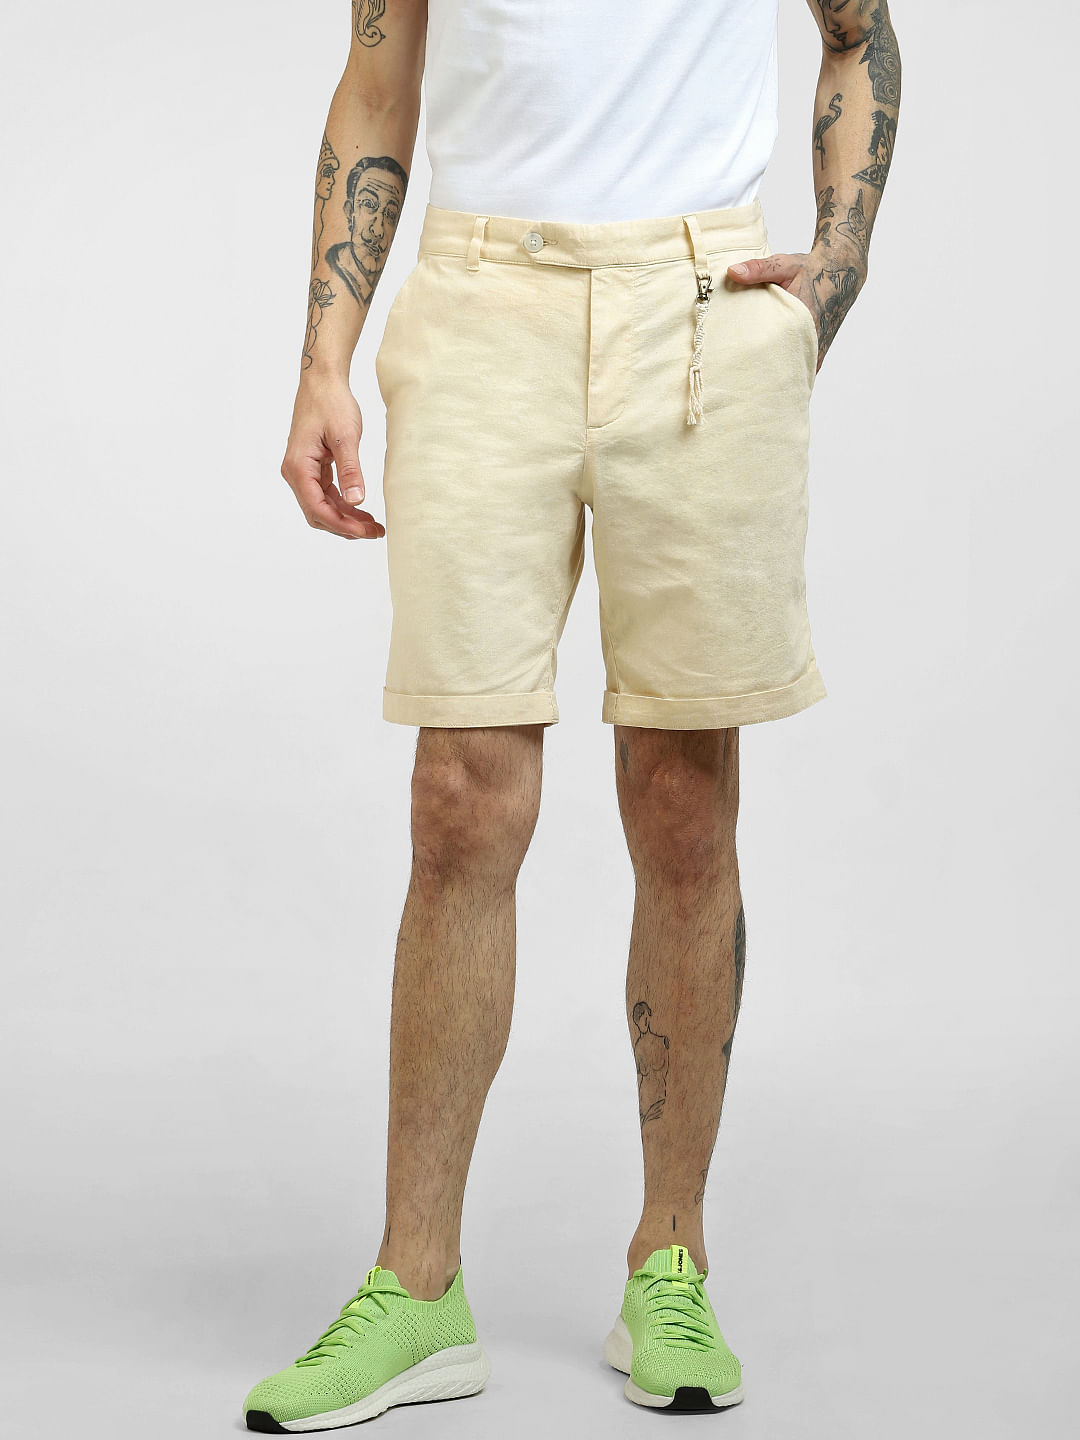 Buy Men's Cotton Blend Beige Bermuda Shorts with 6 Pockets at Amazon.in